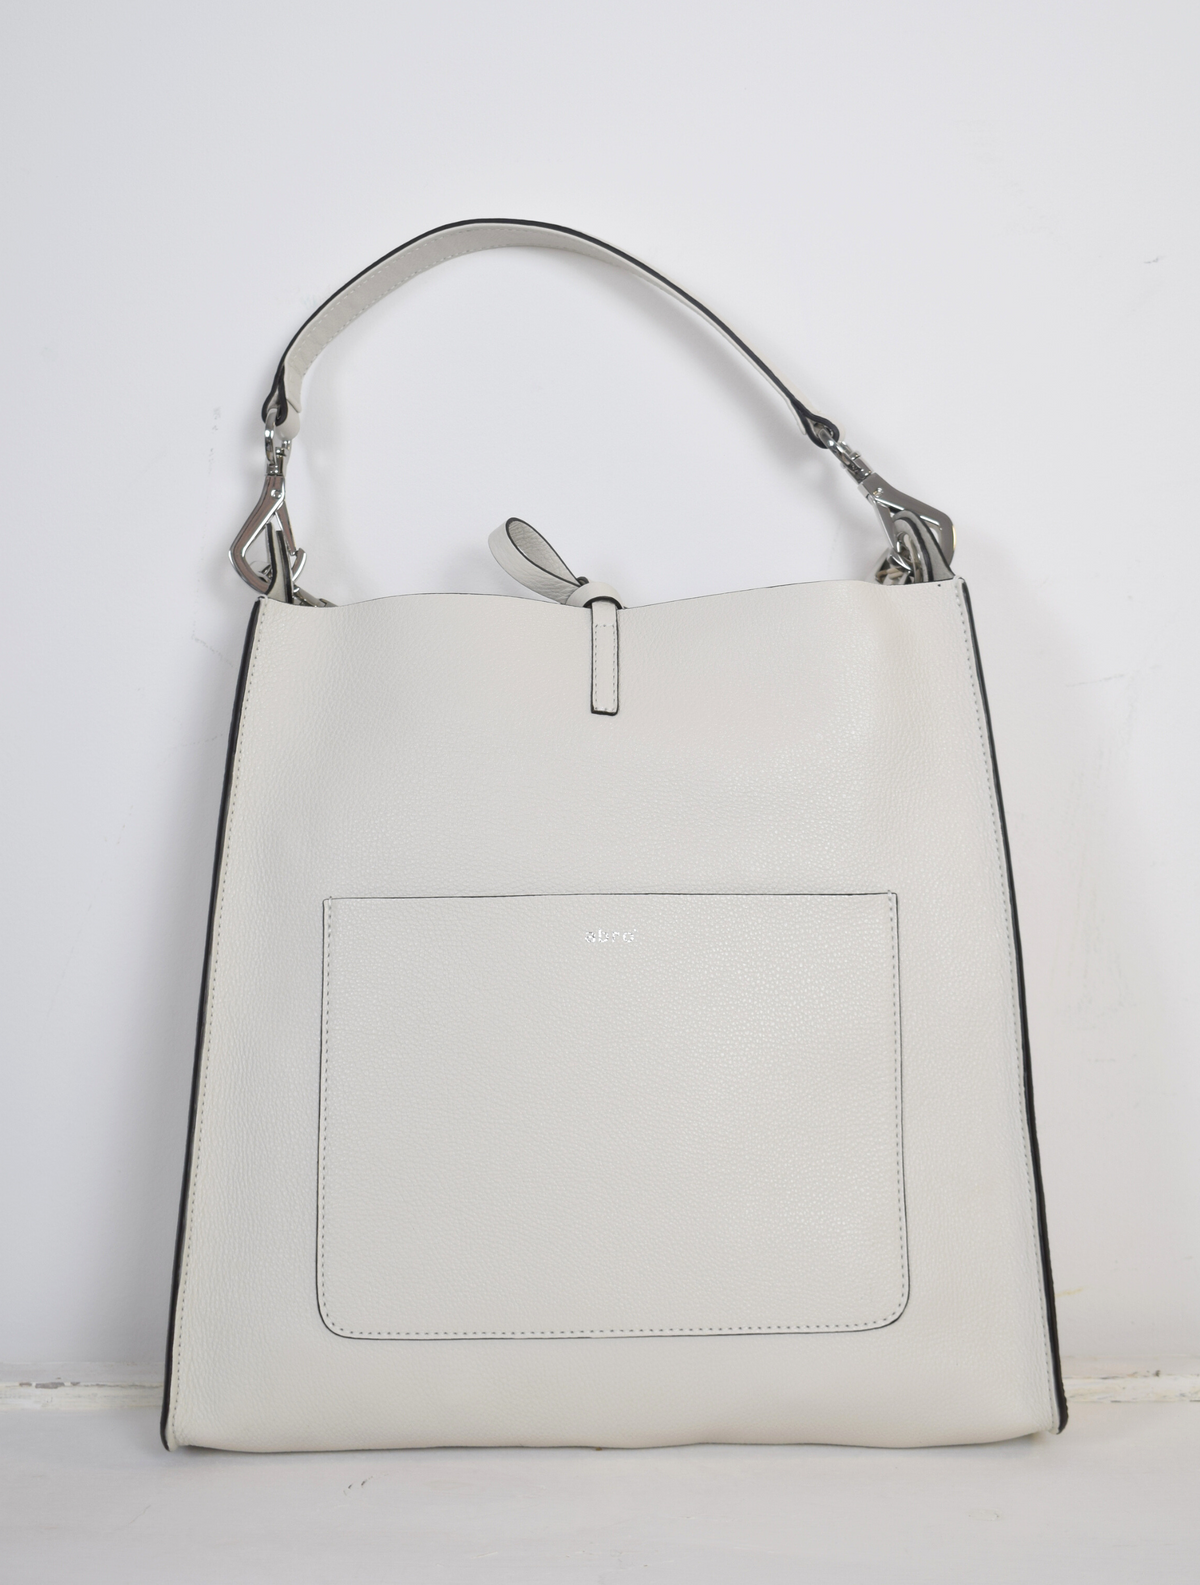 ivory leather bag with silver hardware.  A cross body strap and a handle. 